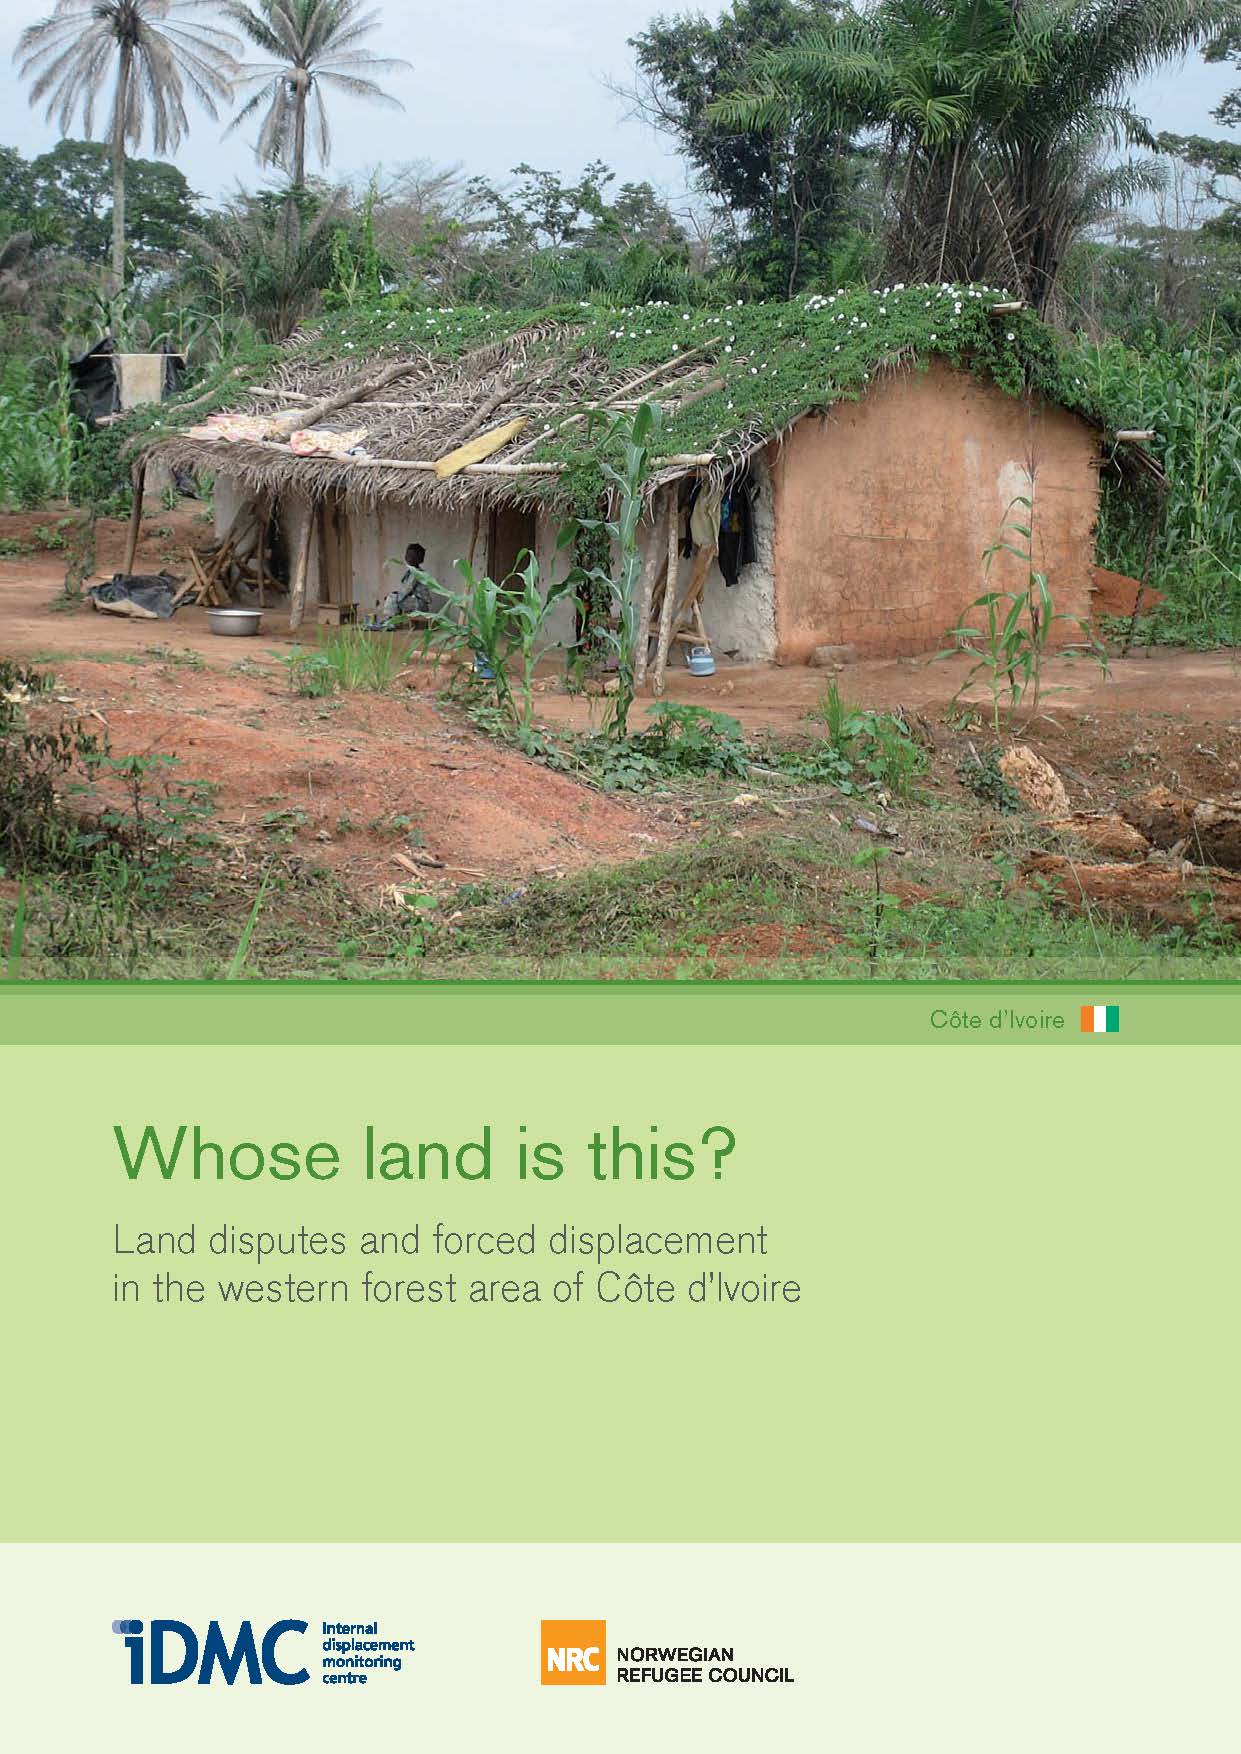 Whose land is this? Land disputes and forced displacement in the western forest area of Côte d’Ivoire